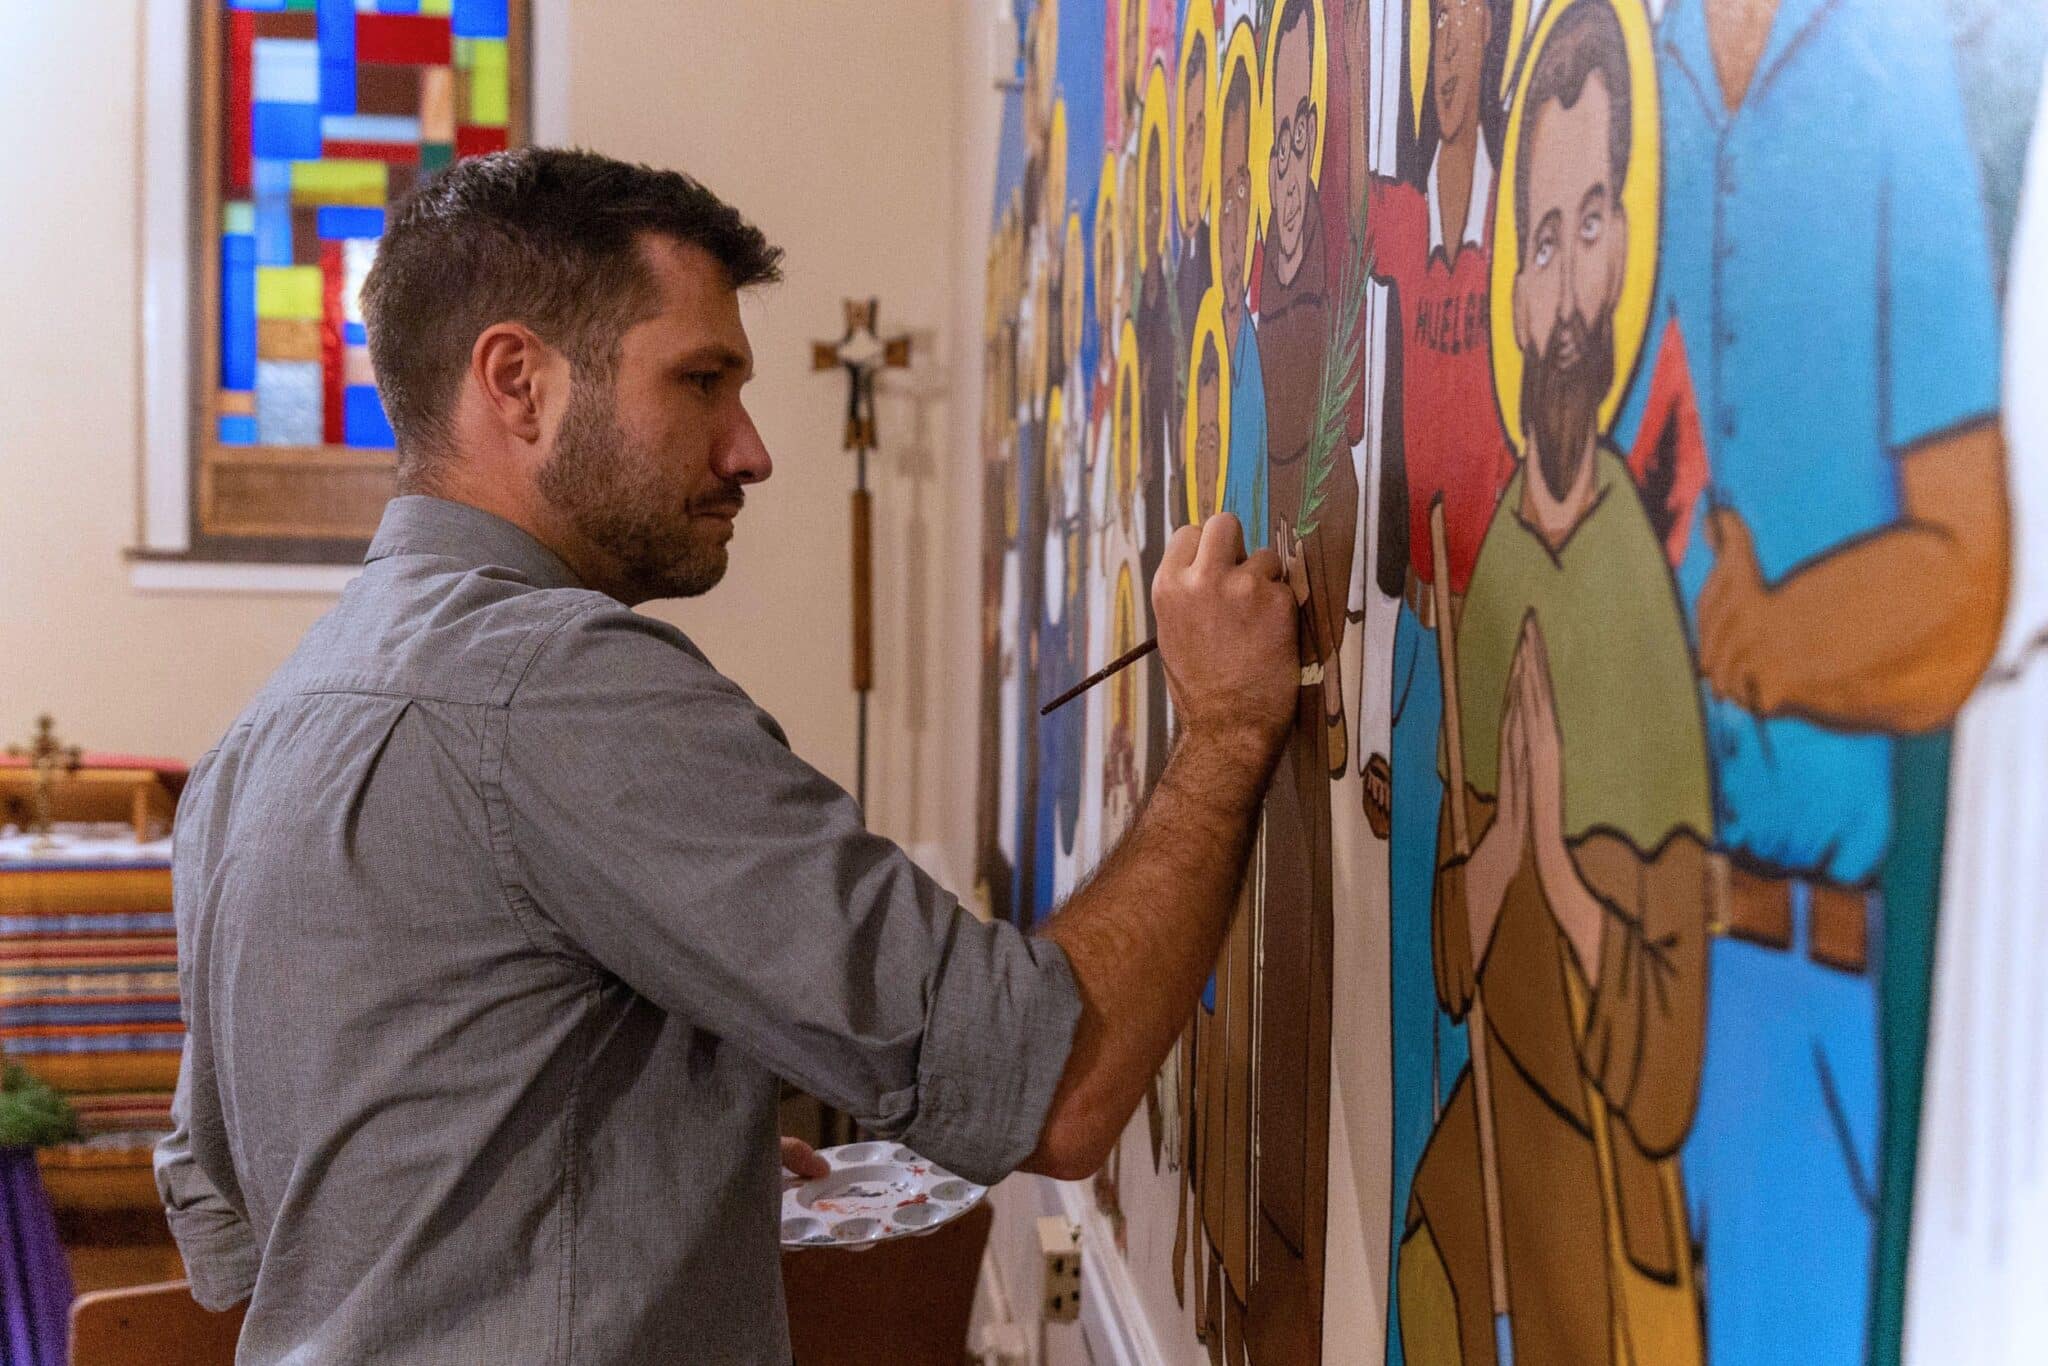 Jeremy Alexander, an iconographer and second-year theology teacher at Detroit Cristo Rey High School, is pictured Dec. 18, 2023, with a mural he created on a wall of the school's small chapel. Painted in his signature Byzantine style, the mural features 37 diverse saints, artists, poets, civil rights leaders and human rights activists. (OSV News photo/Steven Stechschulte, special to the Detroit Catholic)